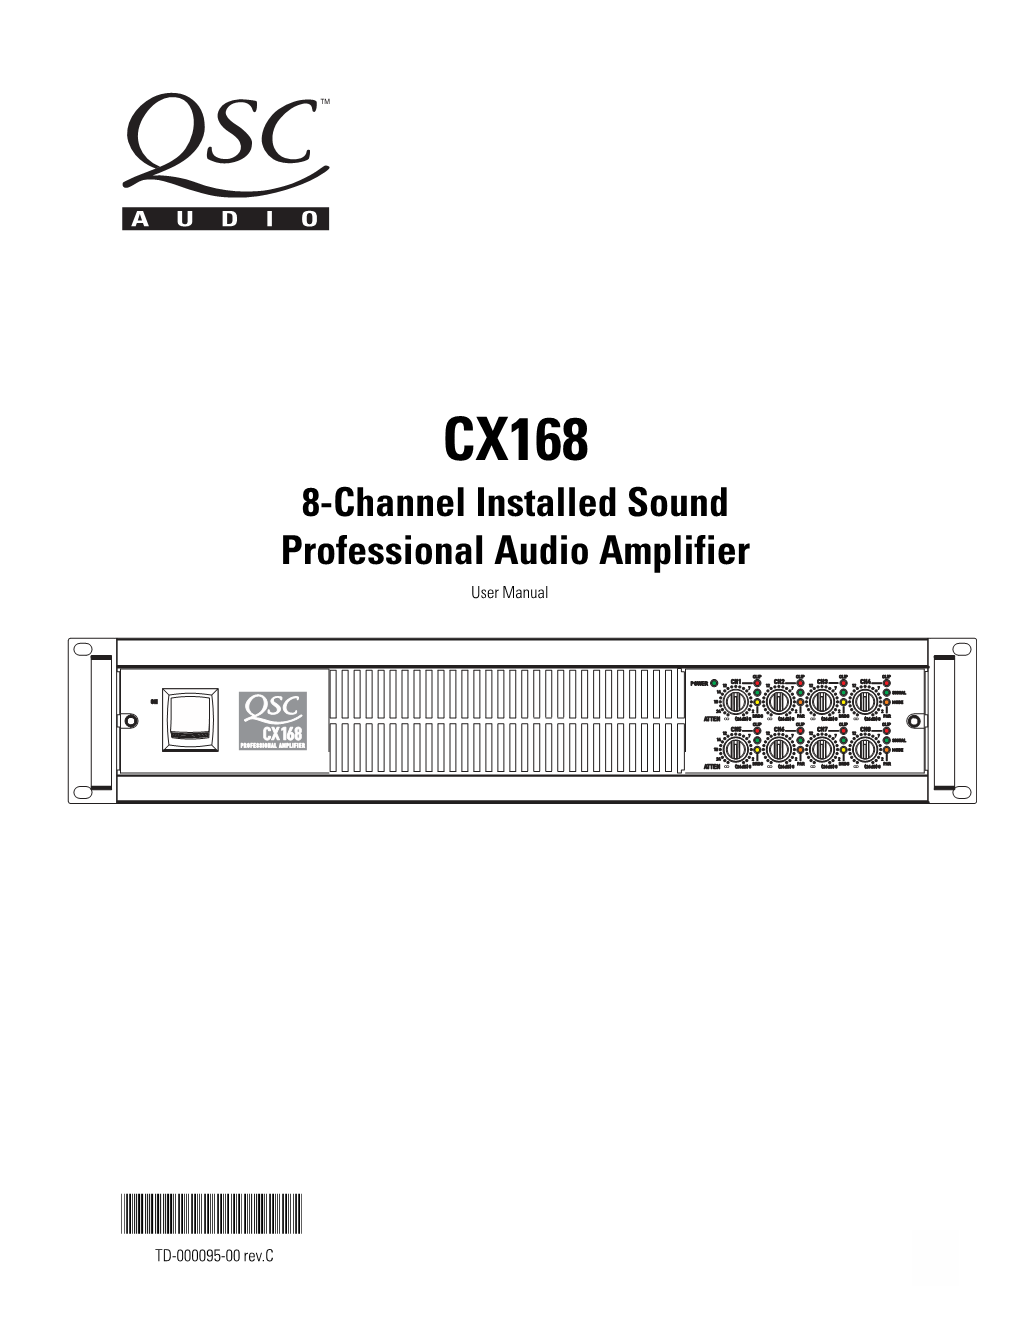 User Manual for the CX168 Power Amplifier